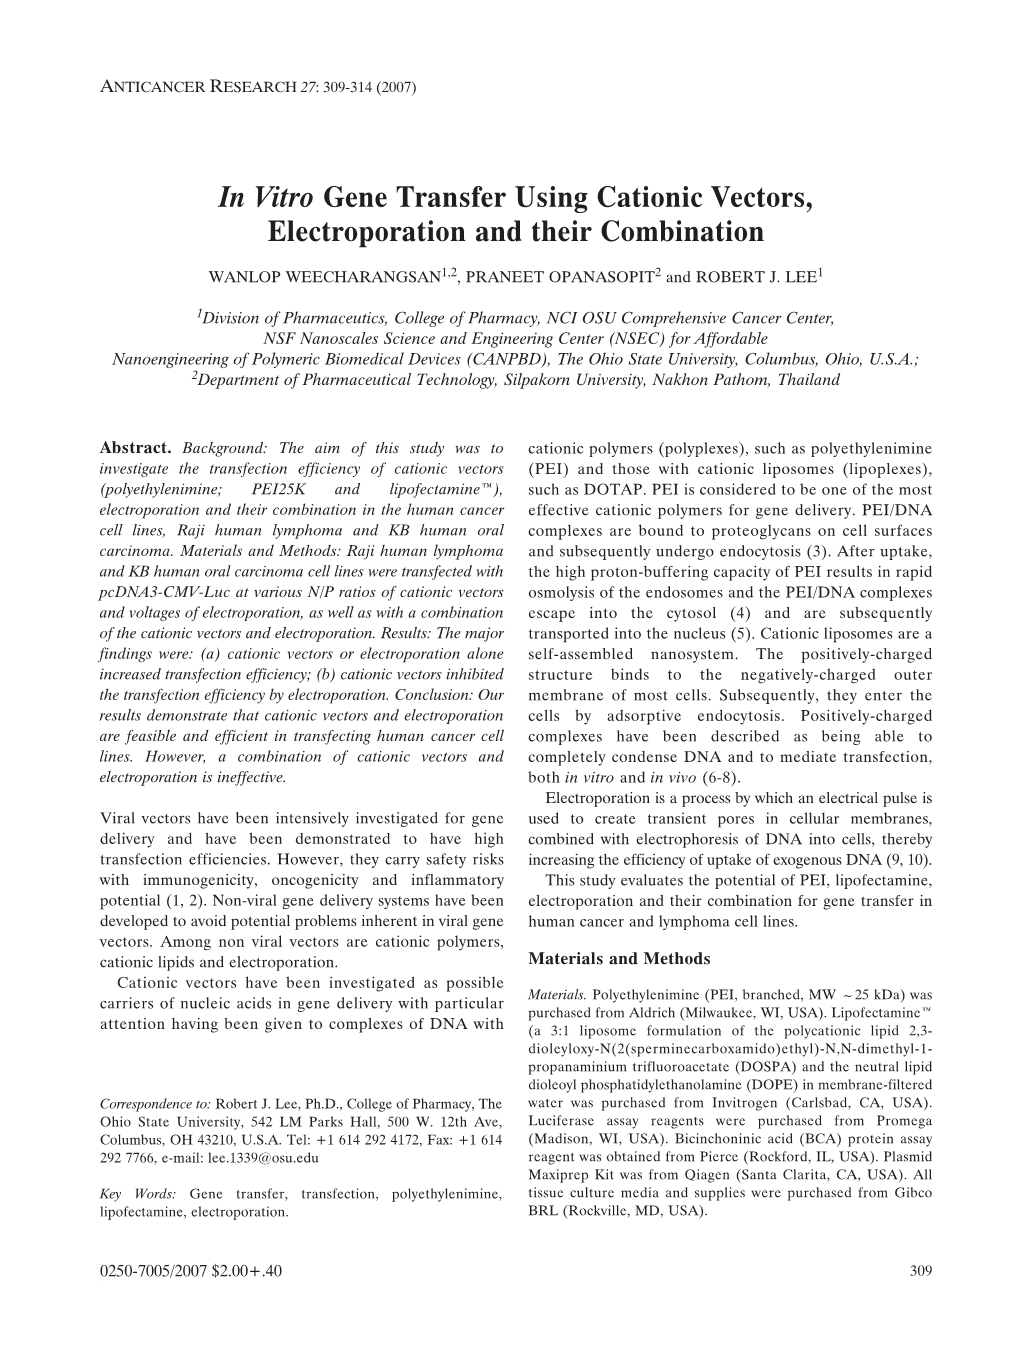 In Vitro Gene Transfer Using Cationic Vectors, Electroporation and Their Combination